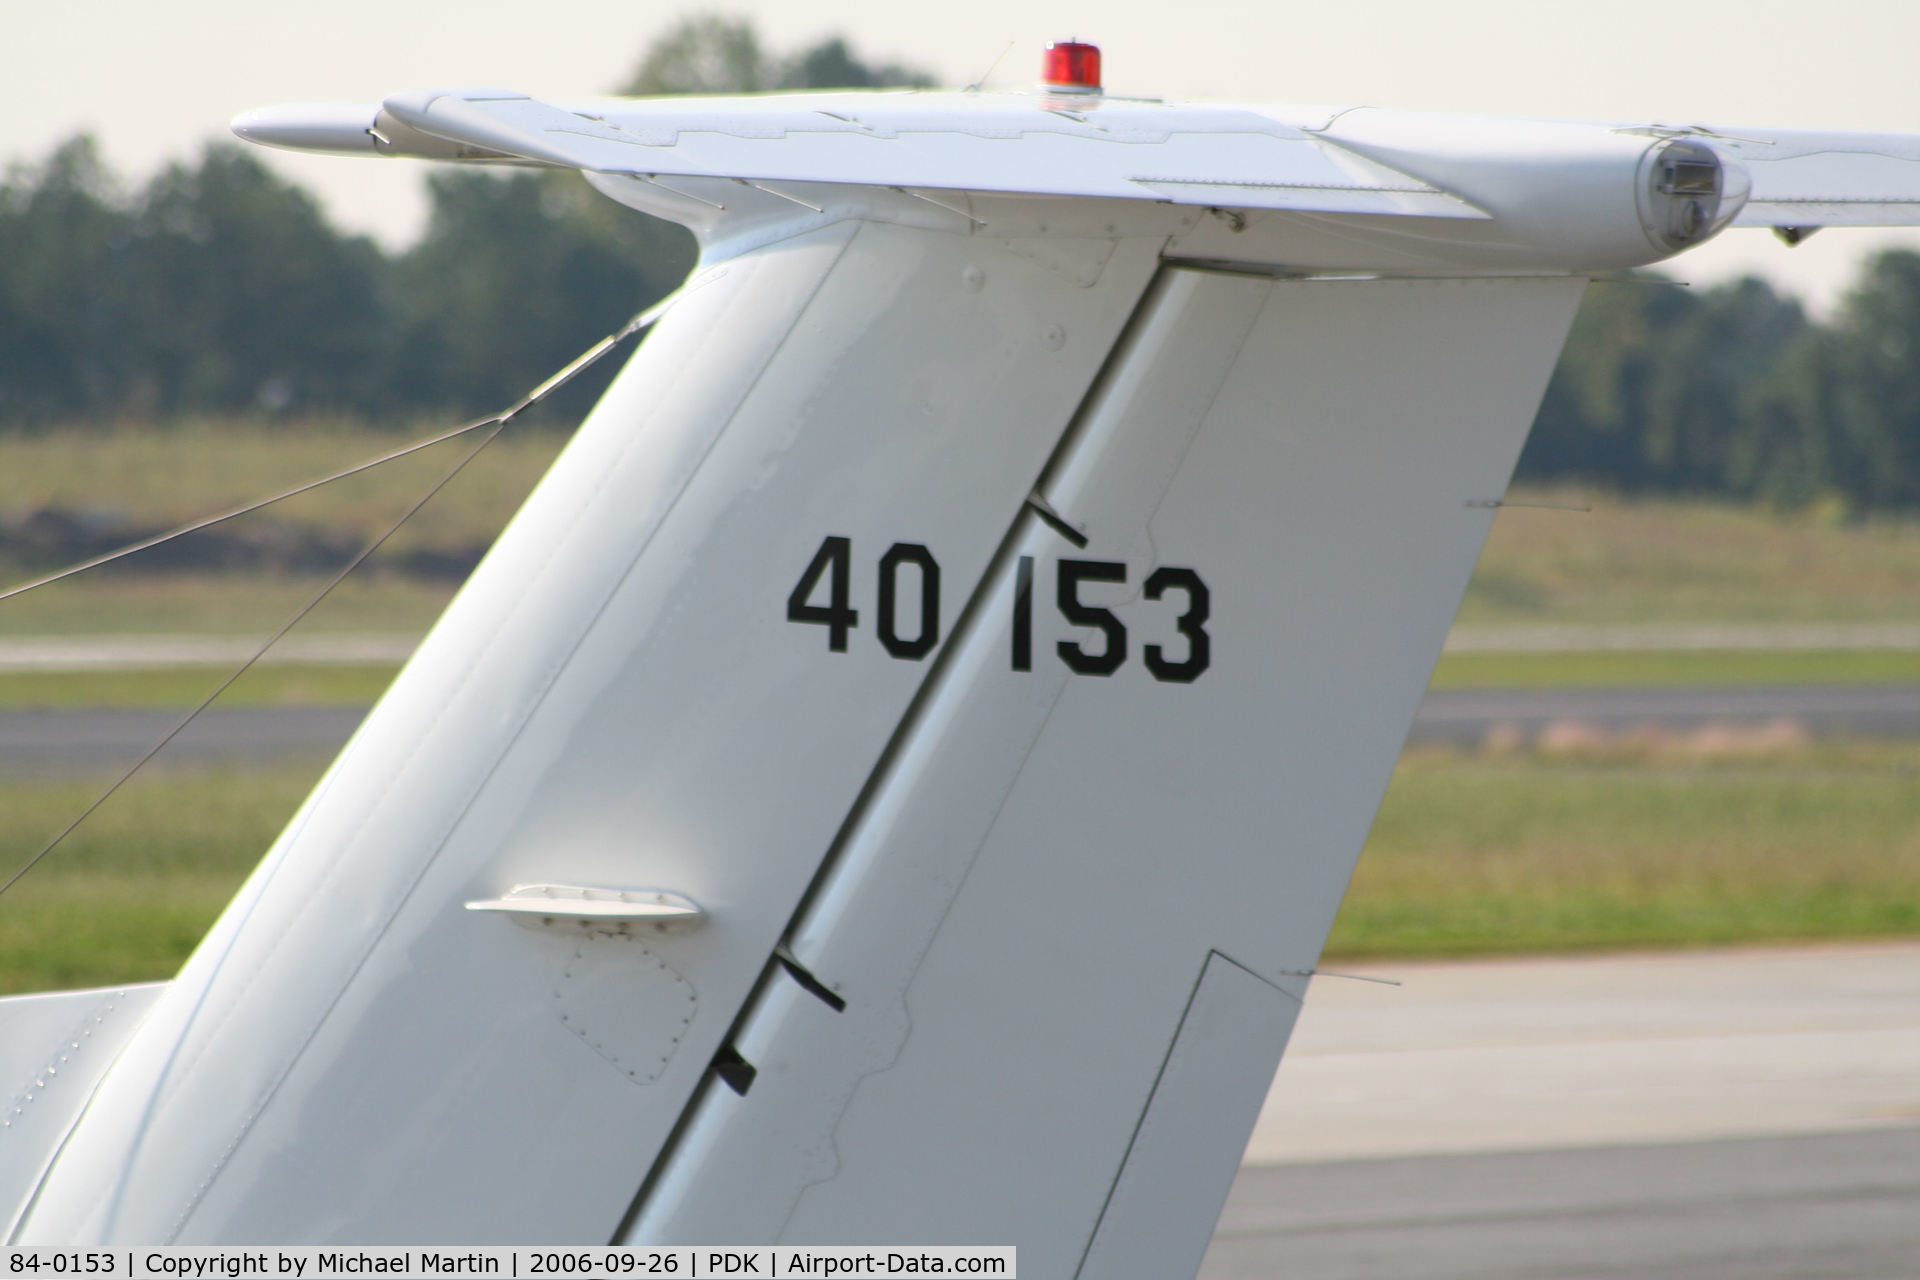 84-0153, 1984 Beech C-12F Huron C/N BL-083, Tail Numbers